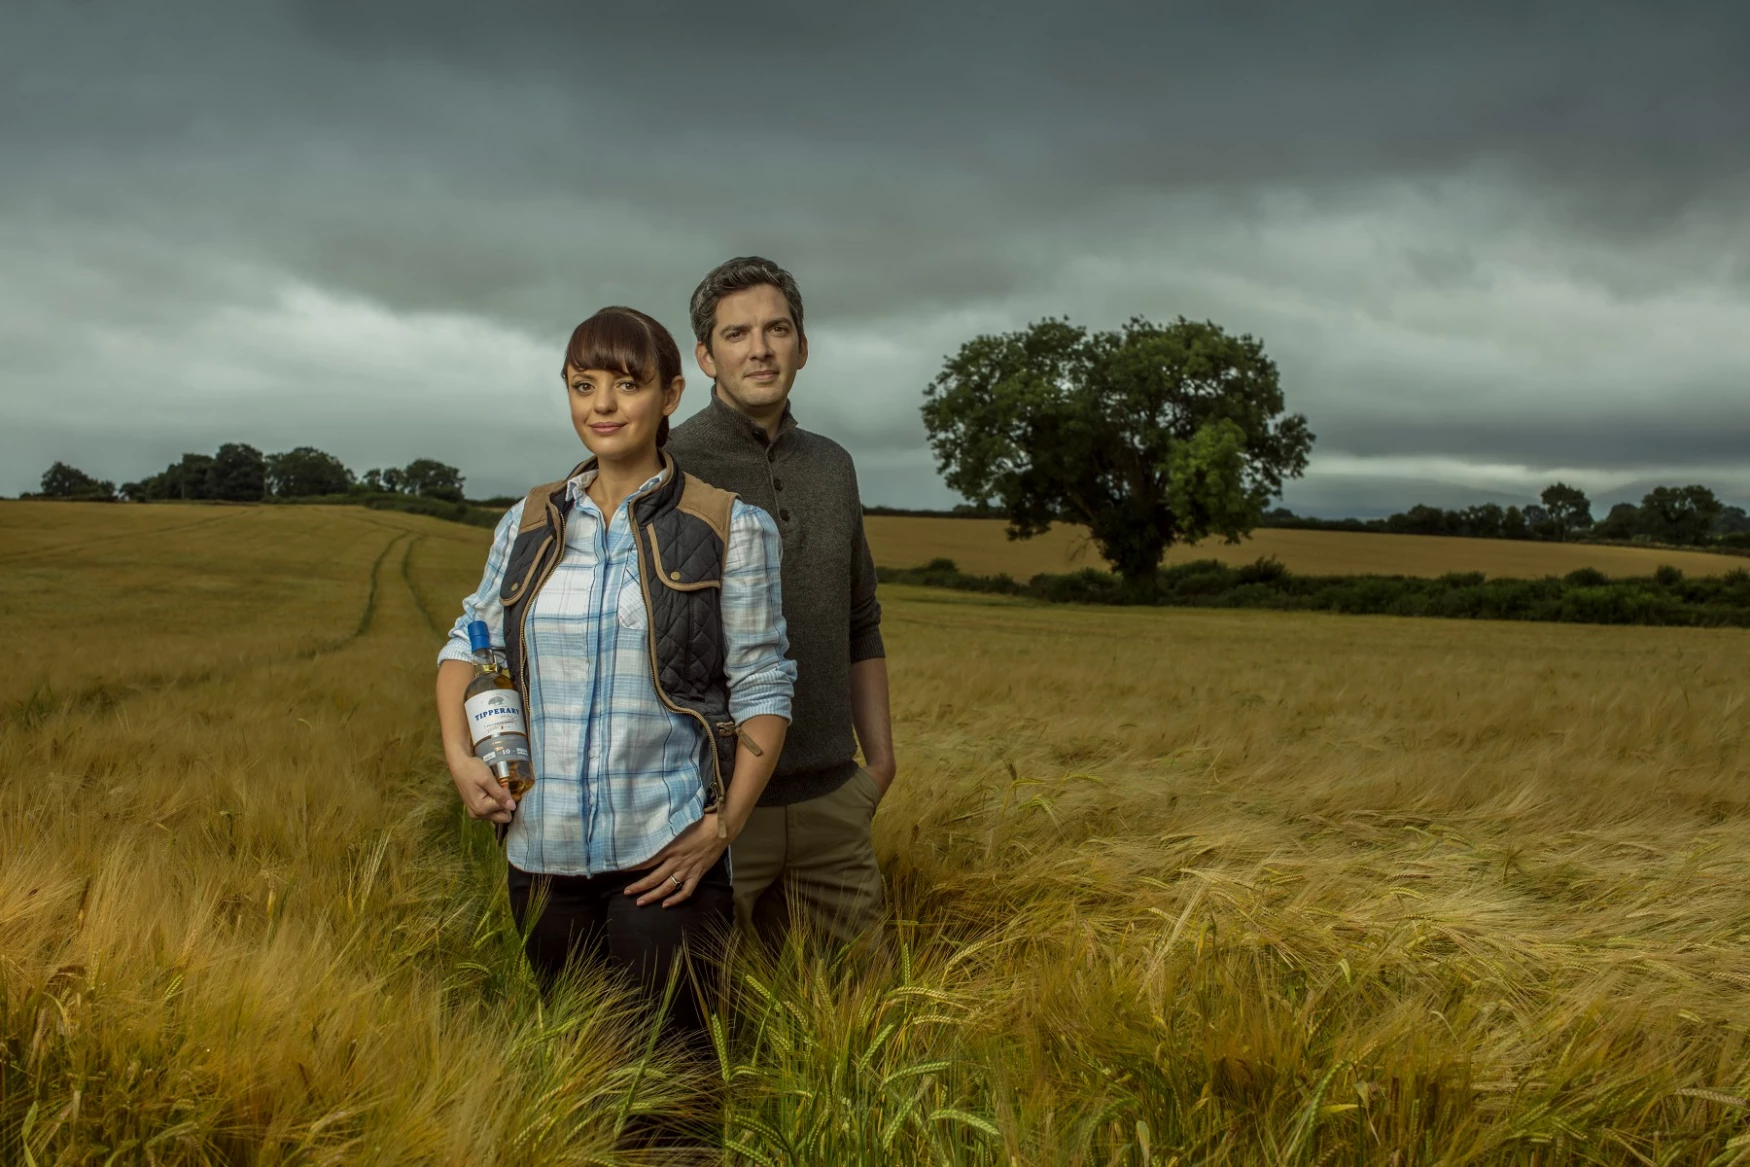 Jennifer and Liam in a field holding a bottle of Watershed whiskey 